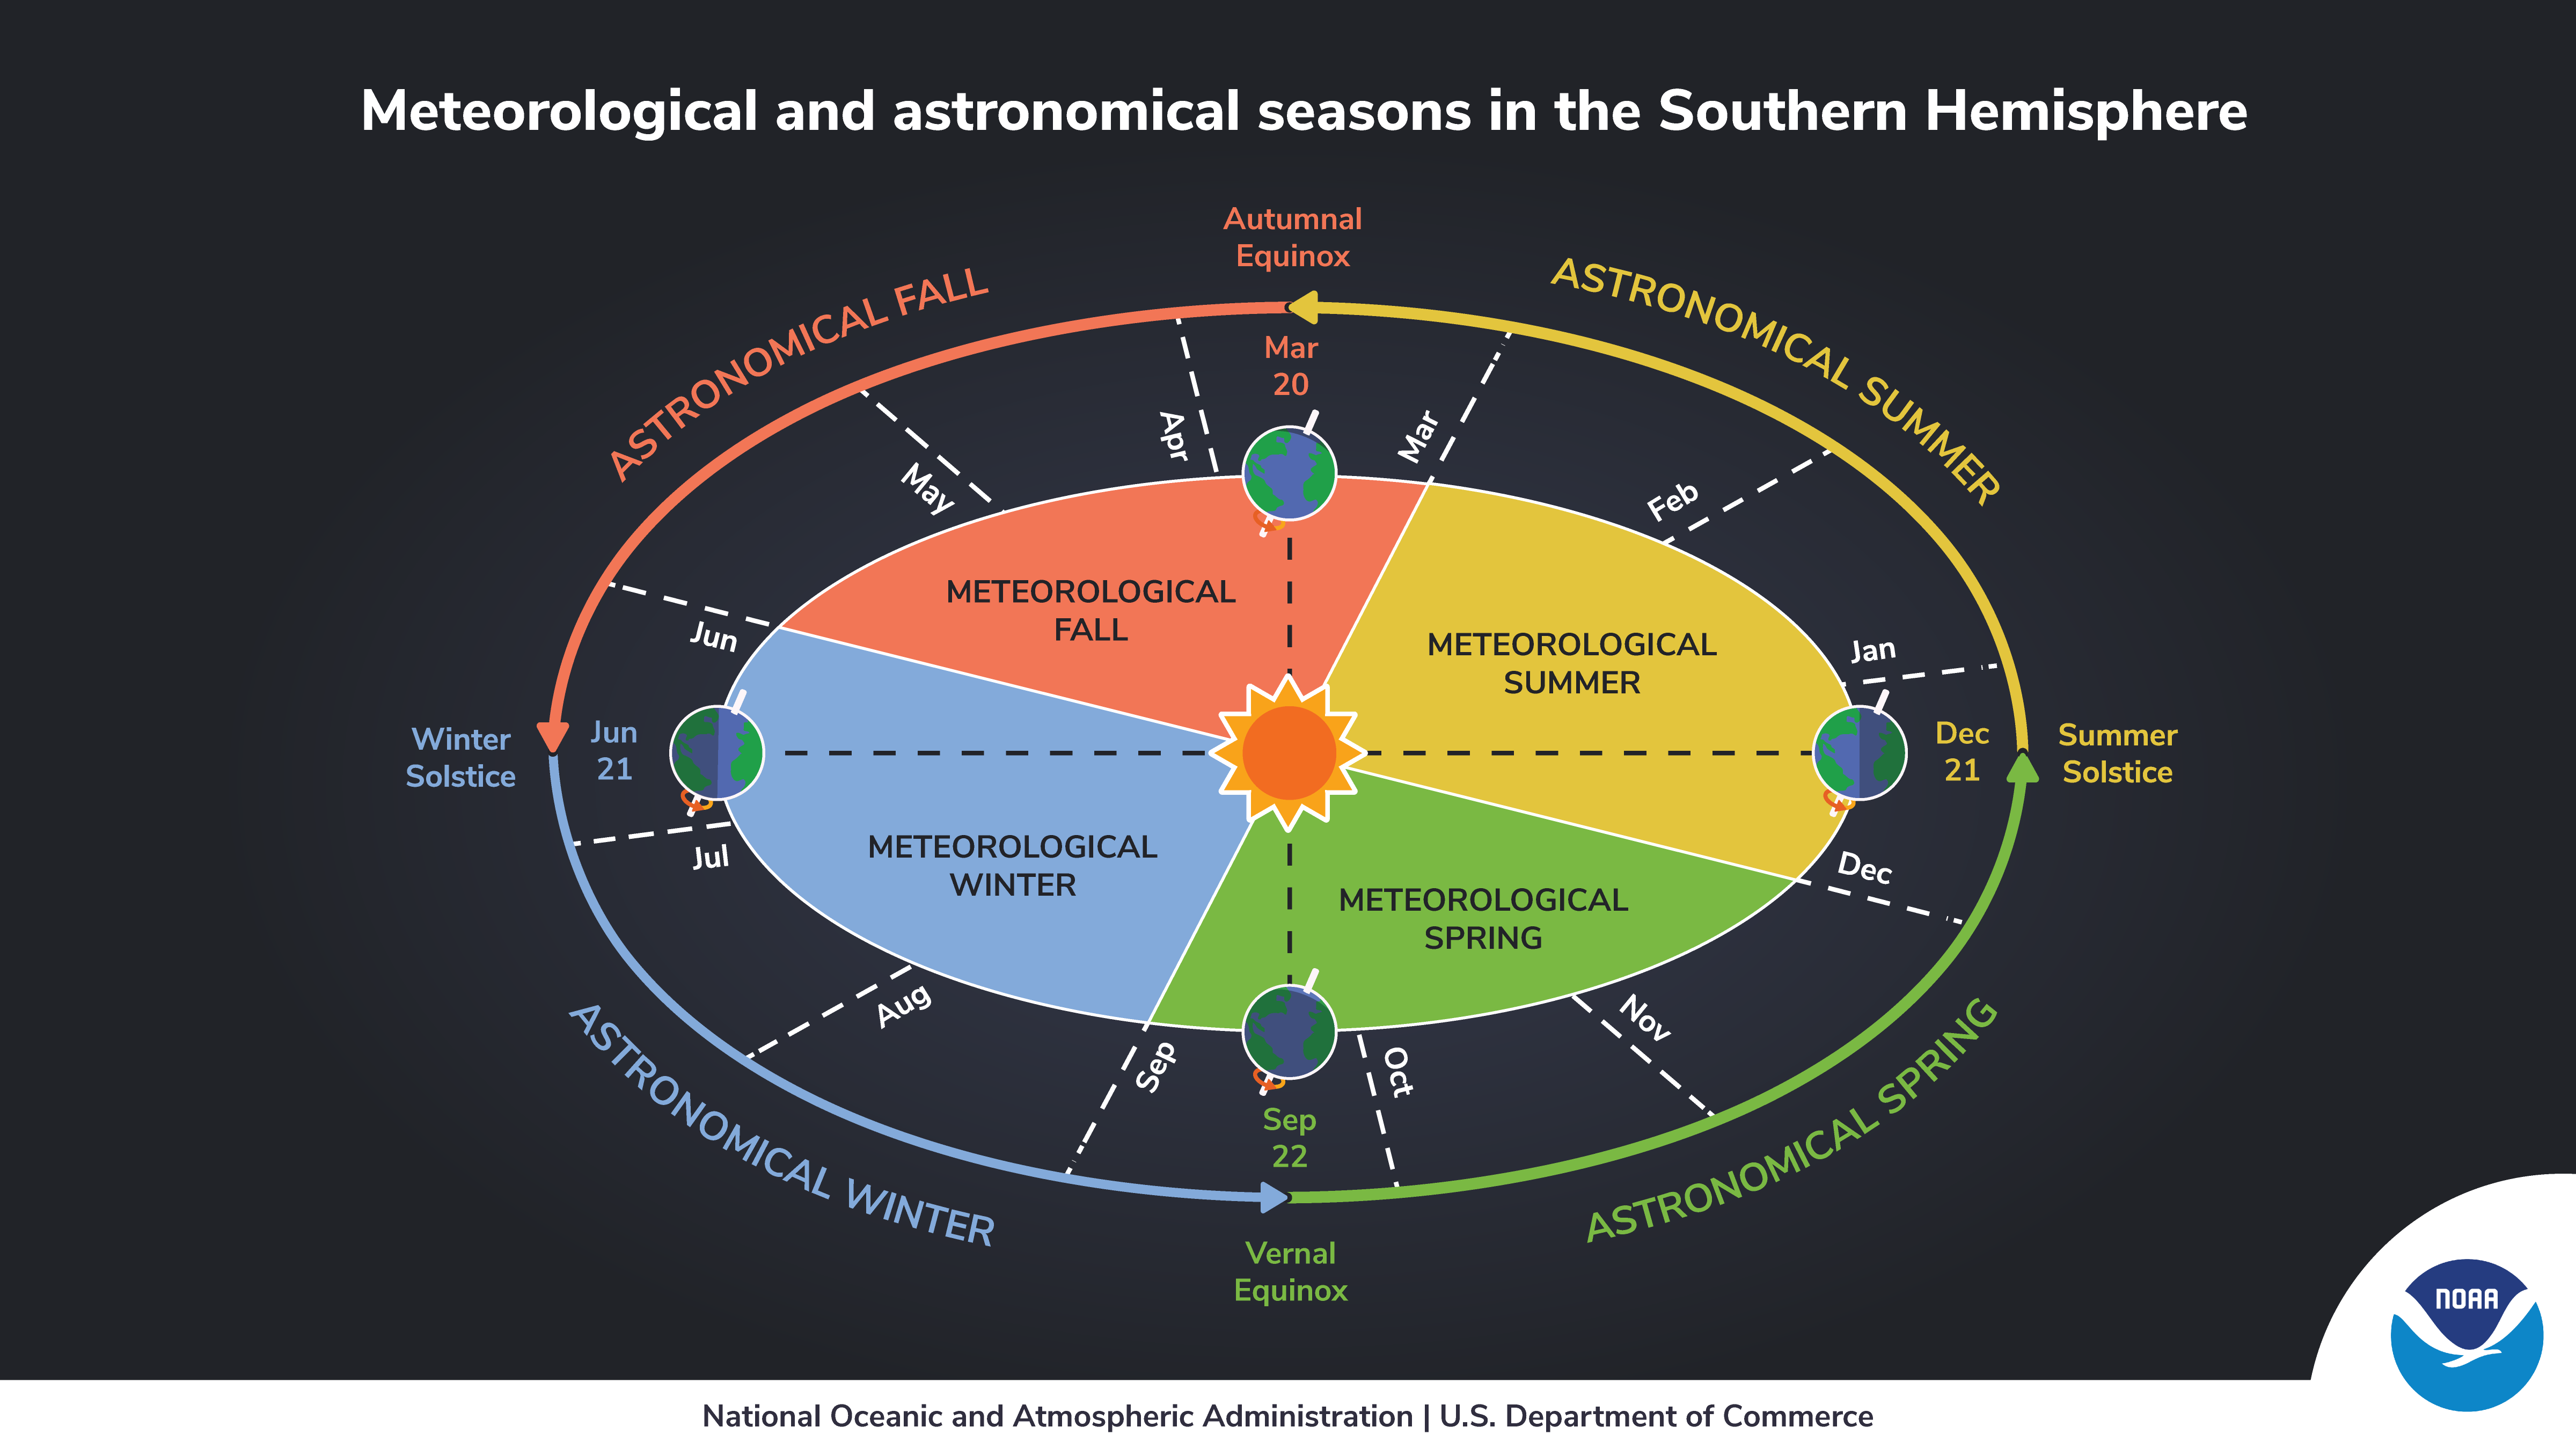 A graphic of the Earth’s orbit around the sun. Meteorological seasons: Winter starts on Jun. 1, spring on Sep. 1, summer on Dec. 1, and fall on Mar. 1. Astronomical seasons: Winter begins on the winter solstice (Jun. 21) when the South Pole is tilted to the max extent away from the sun, spring begins on the spring equinox (Sep. 22), summer begins on the summer solstice (Dec. 21), when the South Pole is tilted to the max extent toward the sun, and fall begins on the autumnal equinox (Mar. 20).